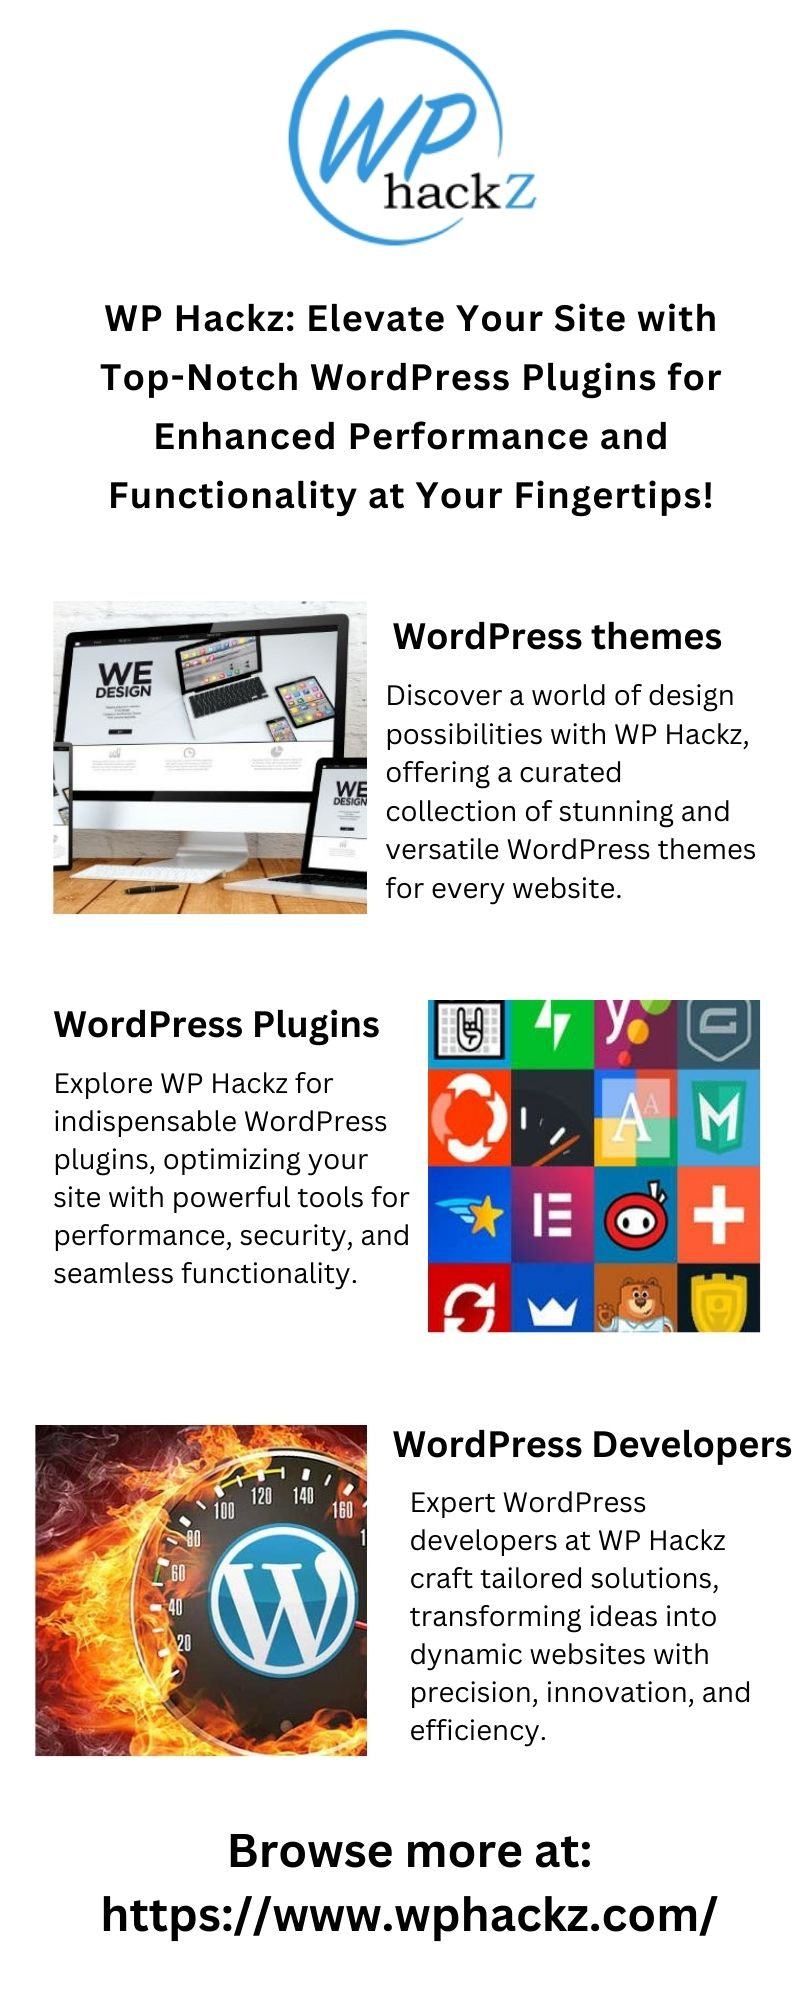 WP Hackz: Empower Your Website with Game-Changing WordPress Plugins